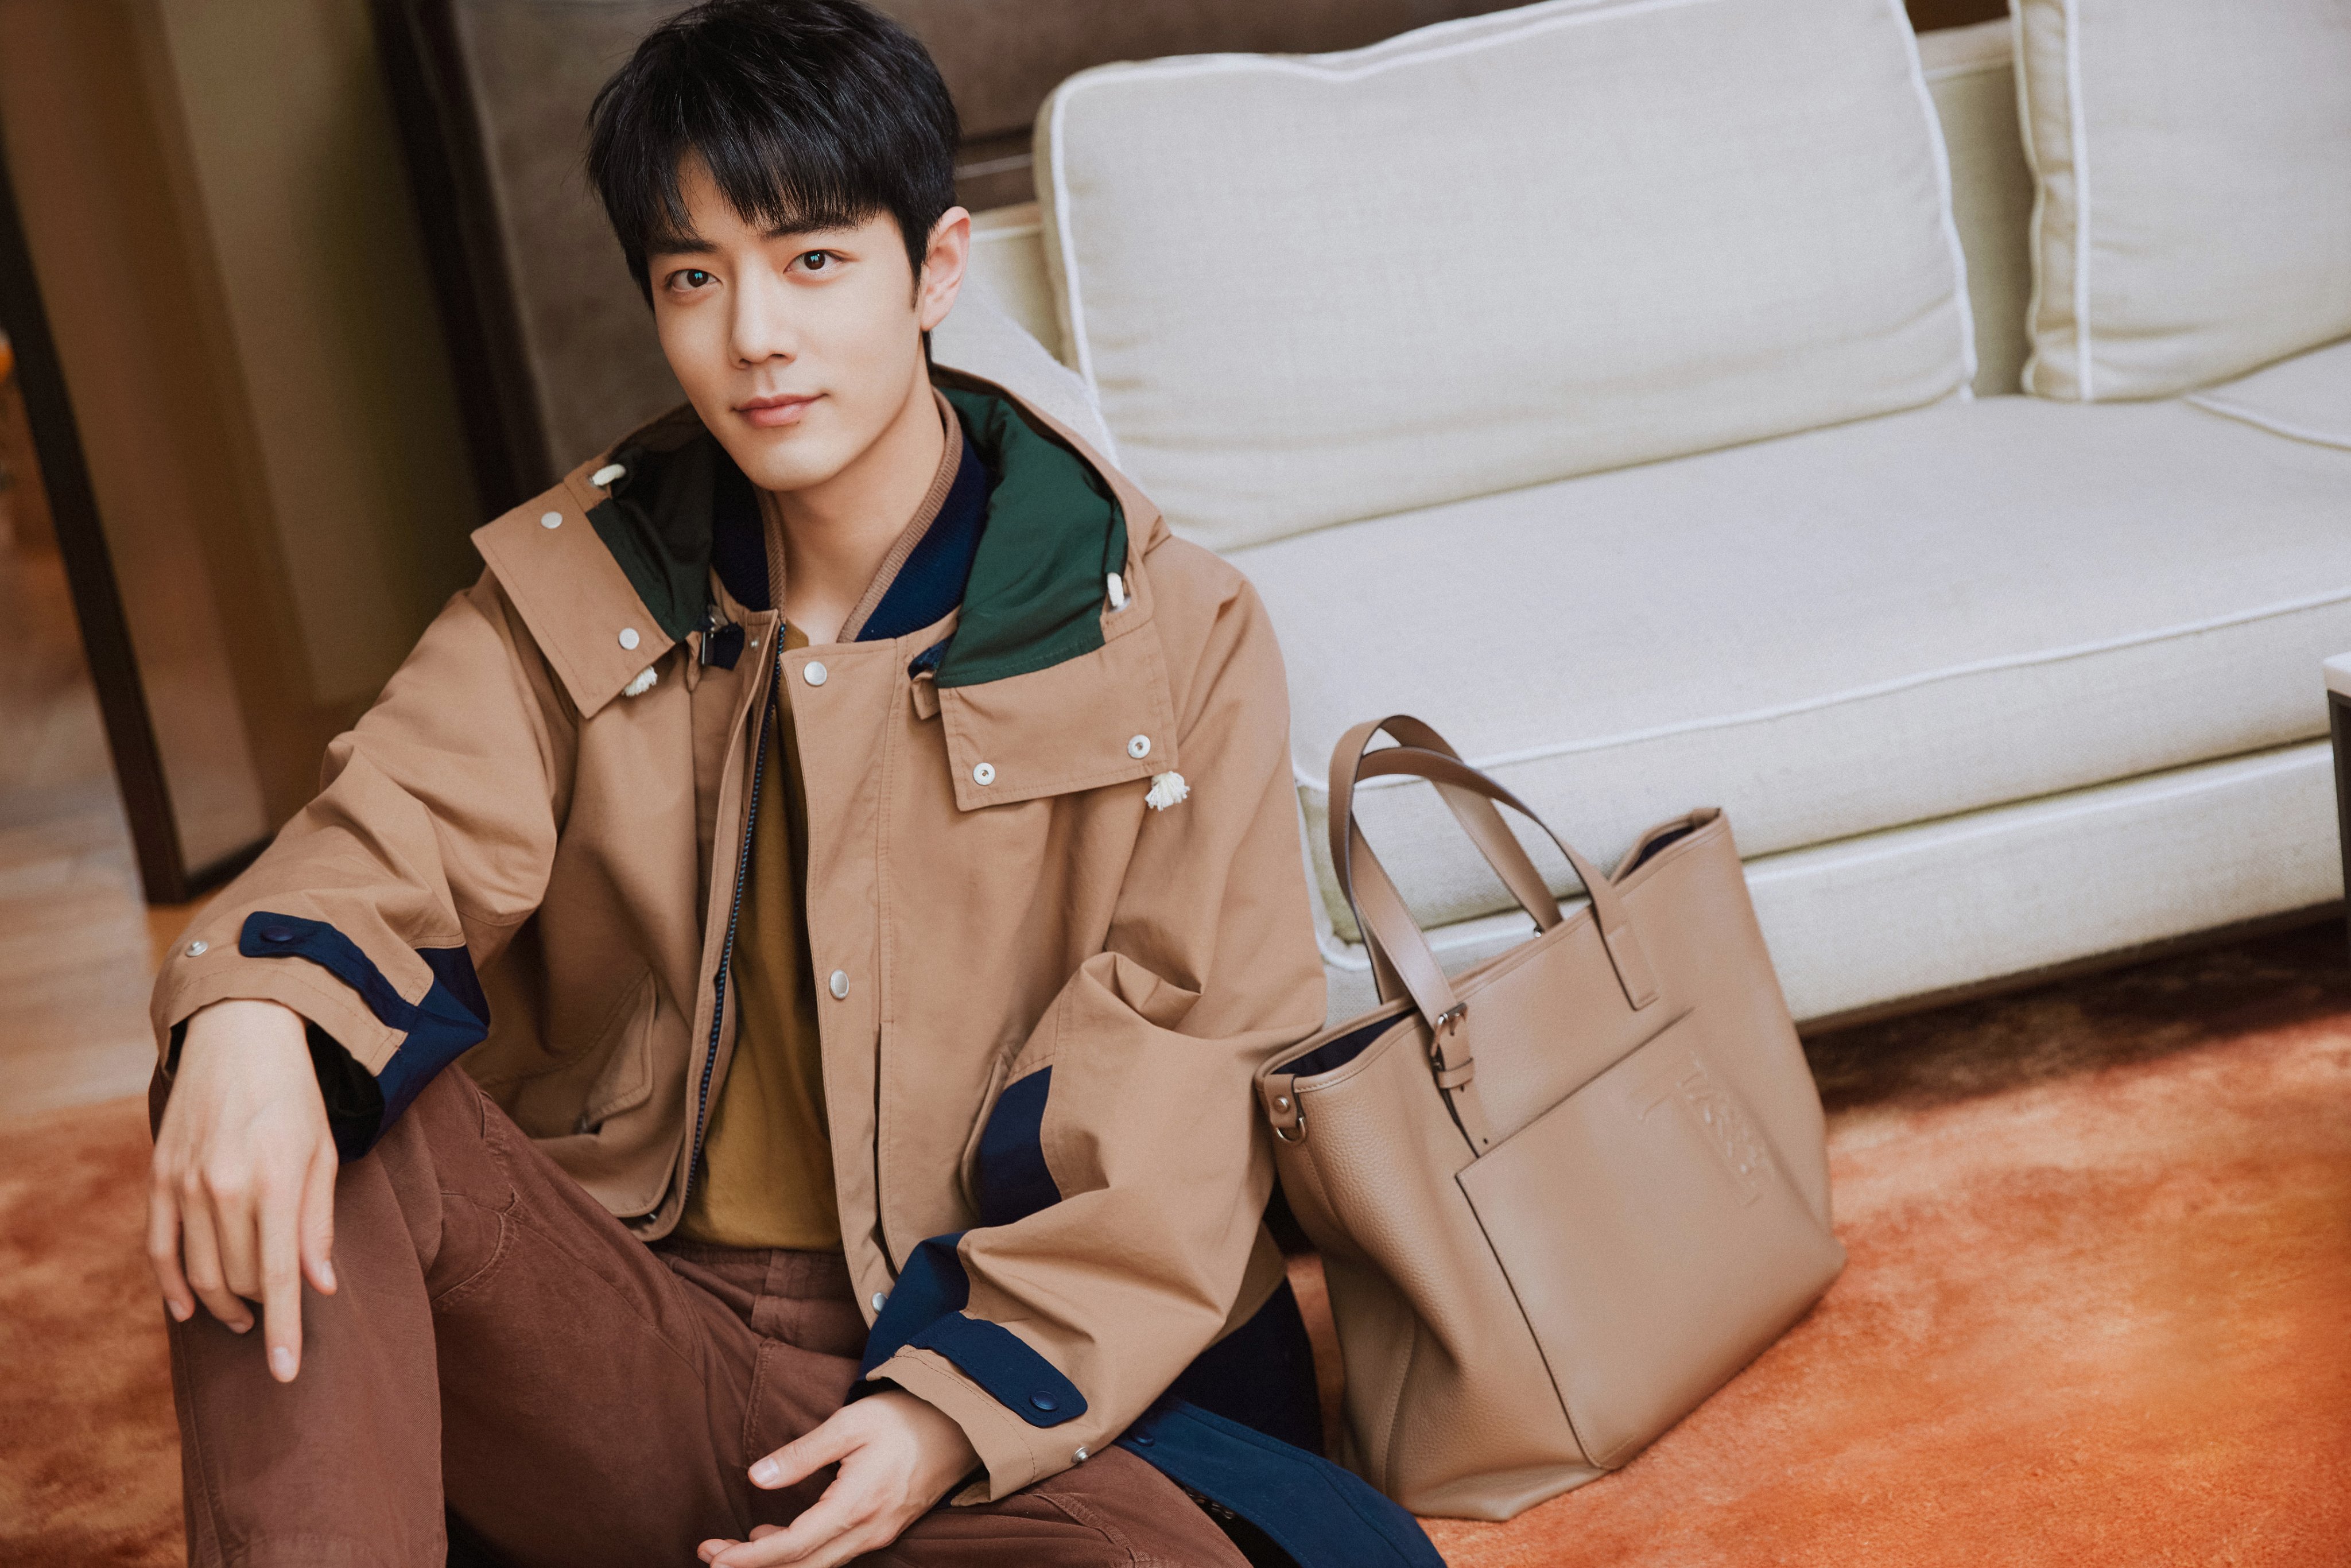 gucci on X: Global Brand Ambassador #XiaoZhan appeared in a #GucciCruise23  sartorial look alongside Gucci Savoy luggage from the #GucciValigeria  collection. #GucciTailoring  / X